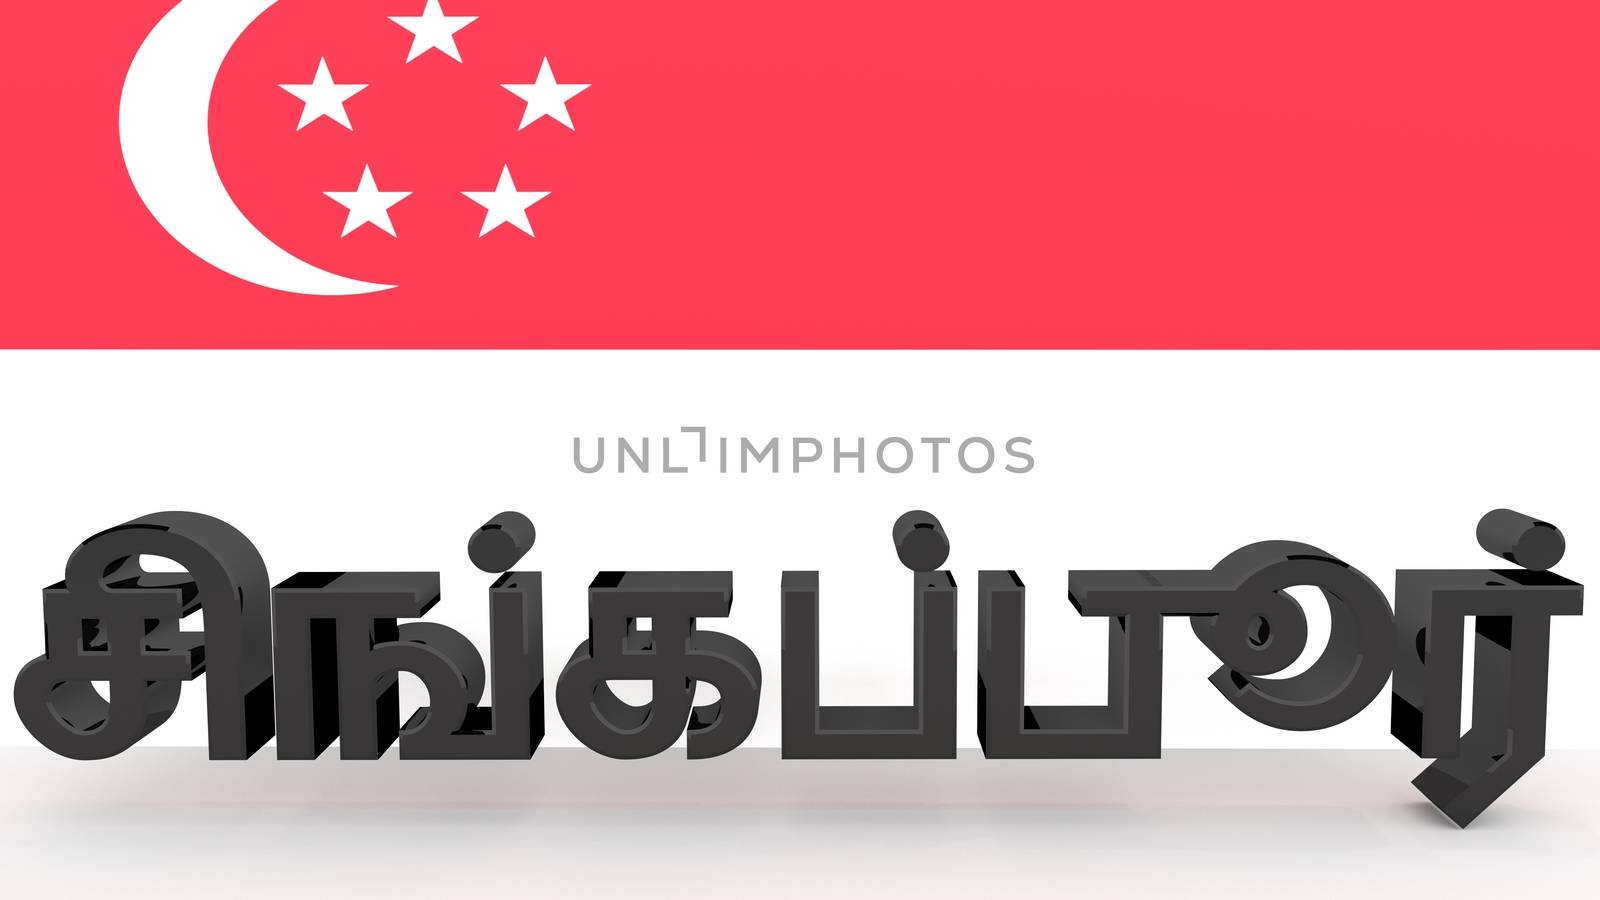 Tamil characters made of dark metal meaning Singapore in front of a singaporean flag